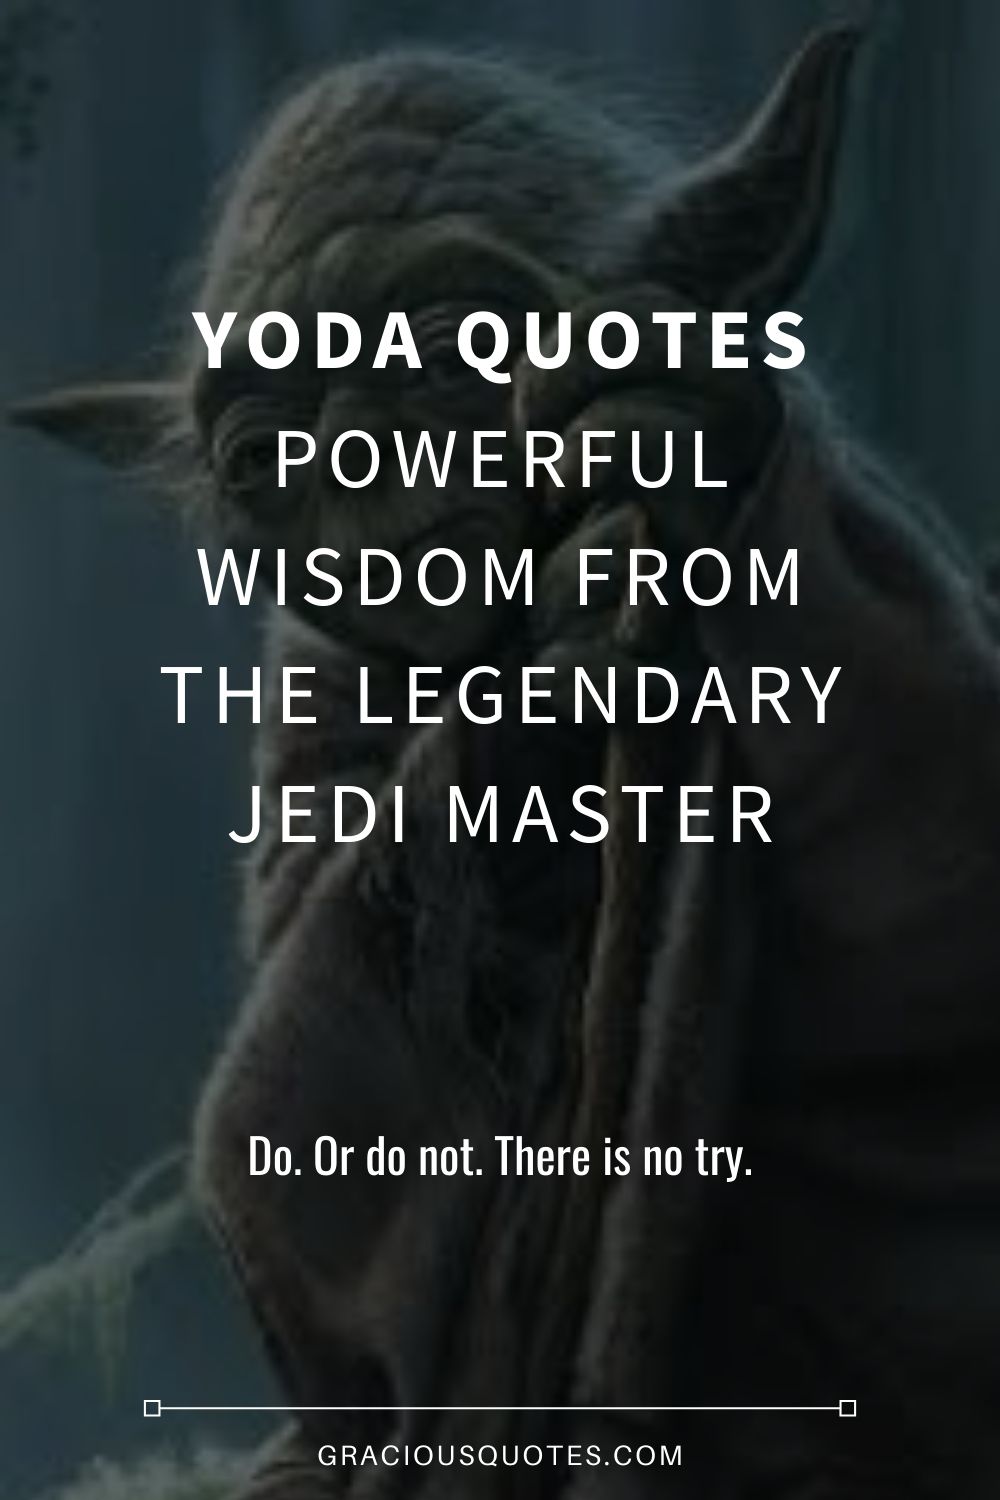 Yoda-Quotes-Powerful-Wisdom-From-the-Legendary-Jedi-Master-Gracious-Quotes